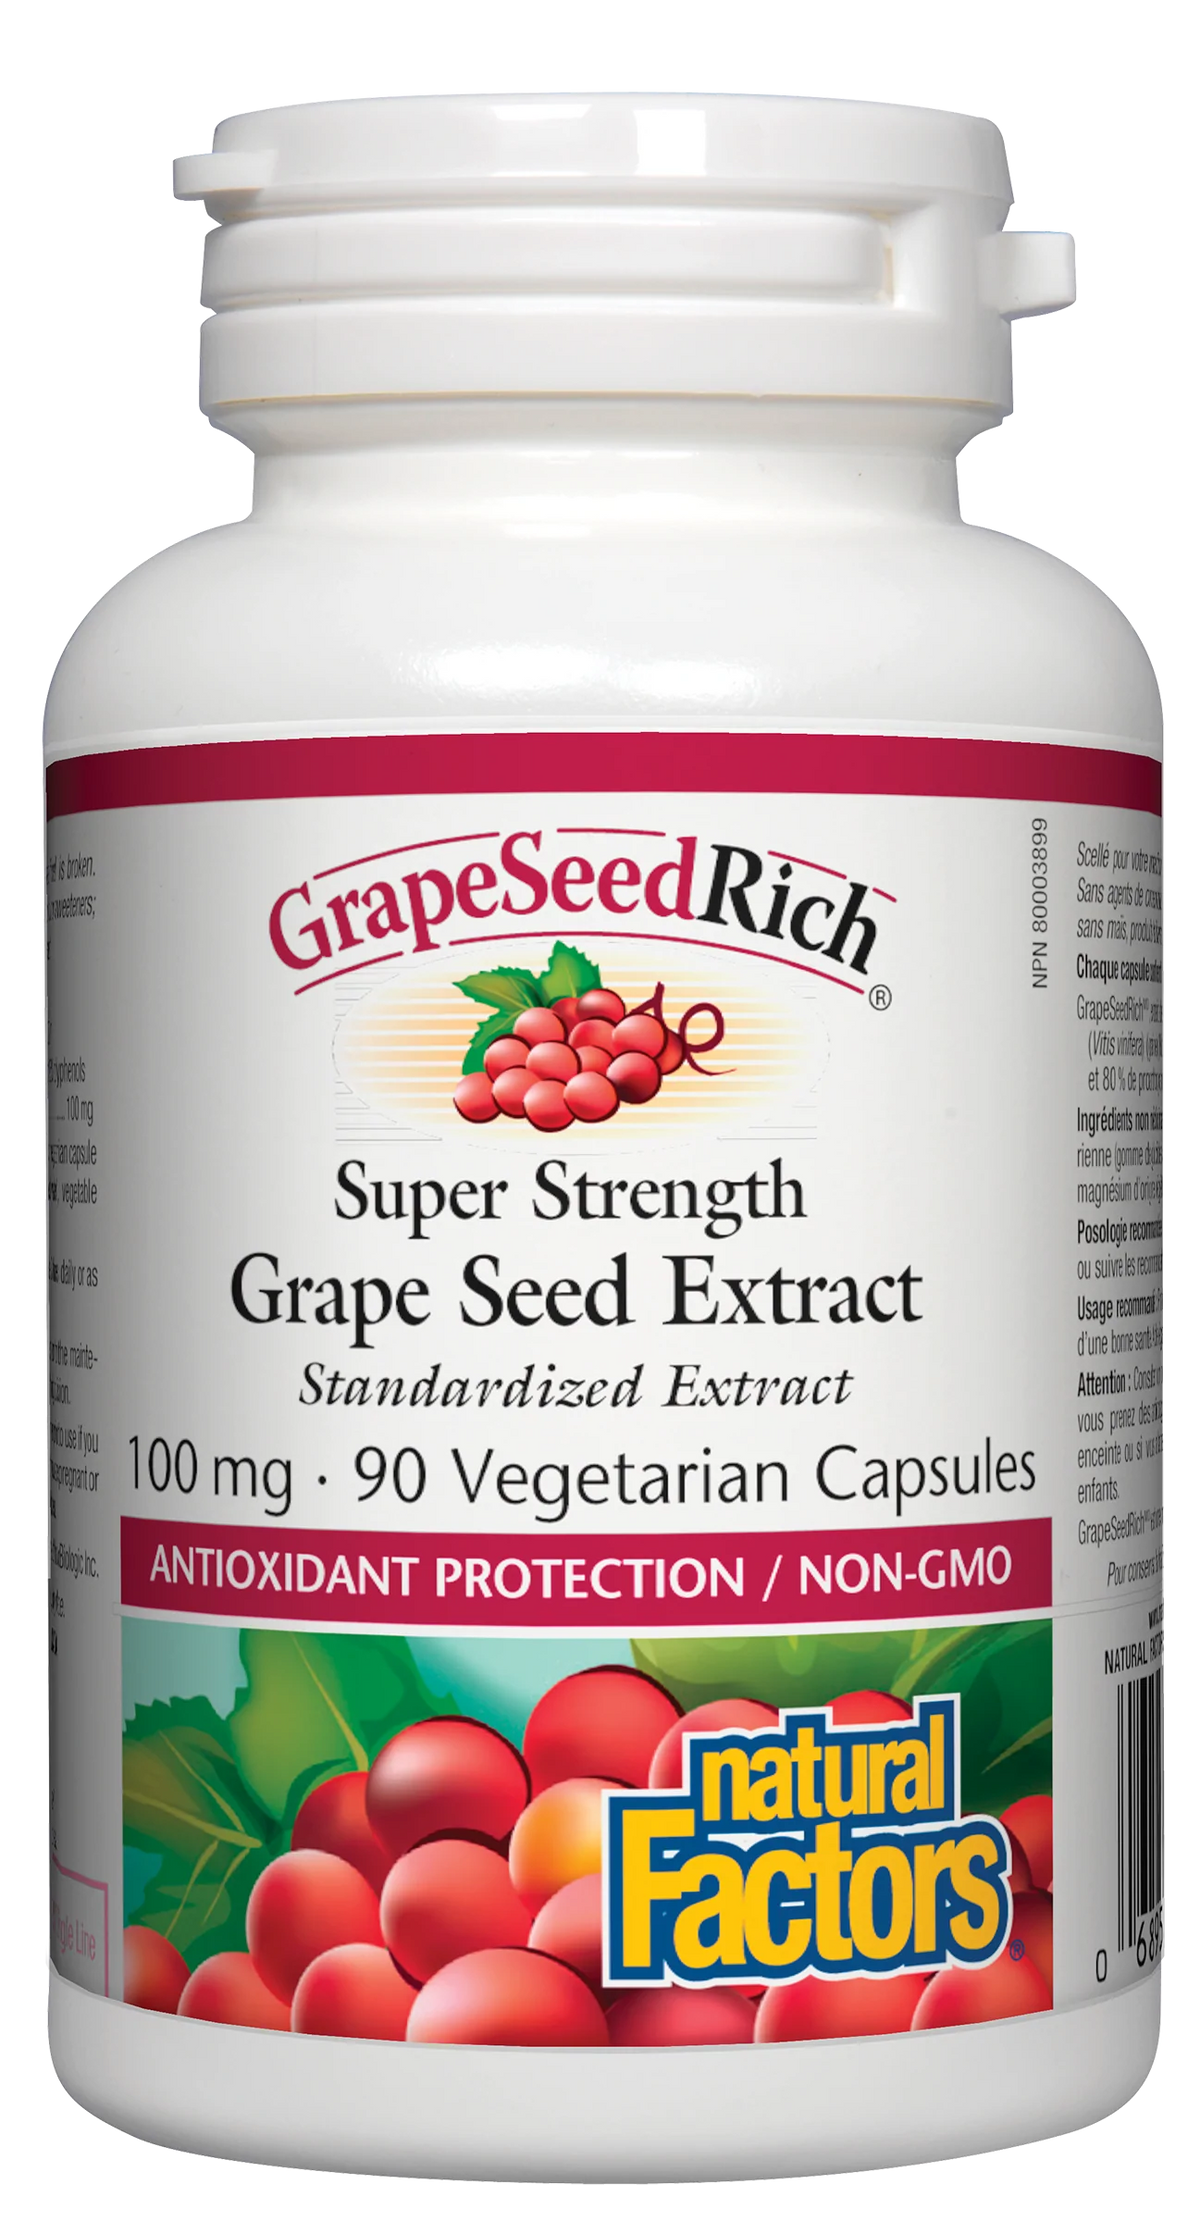 Super Strength Grape Seed Extract - 90 capsules